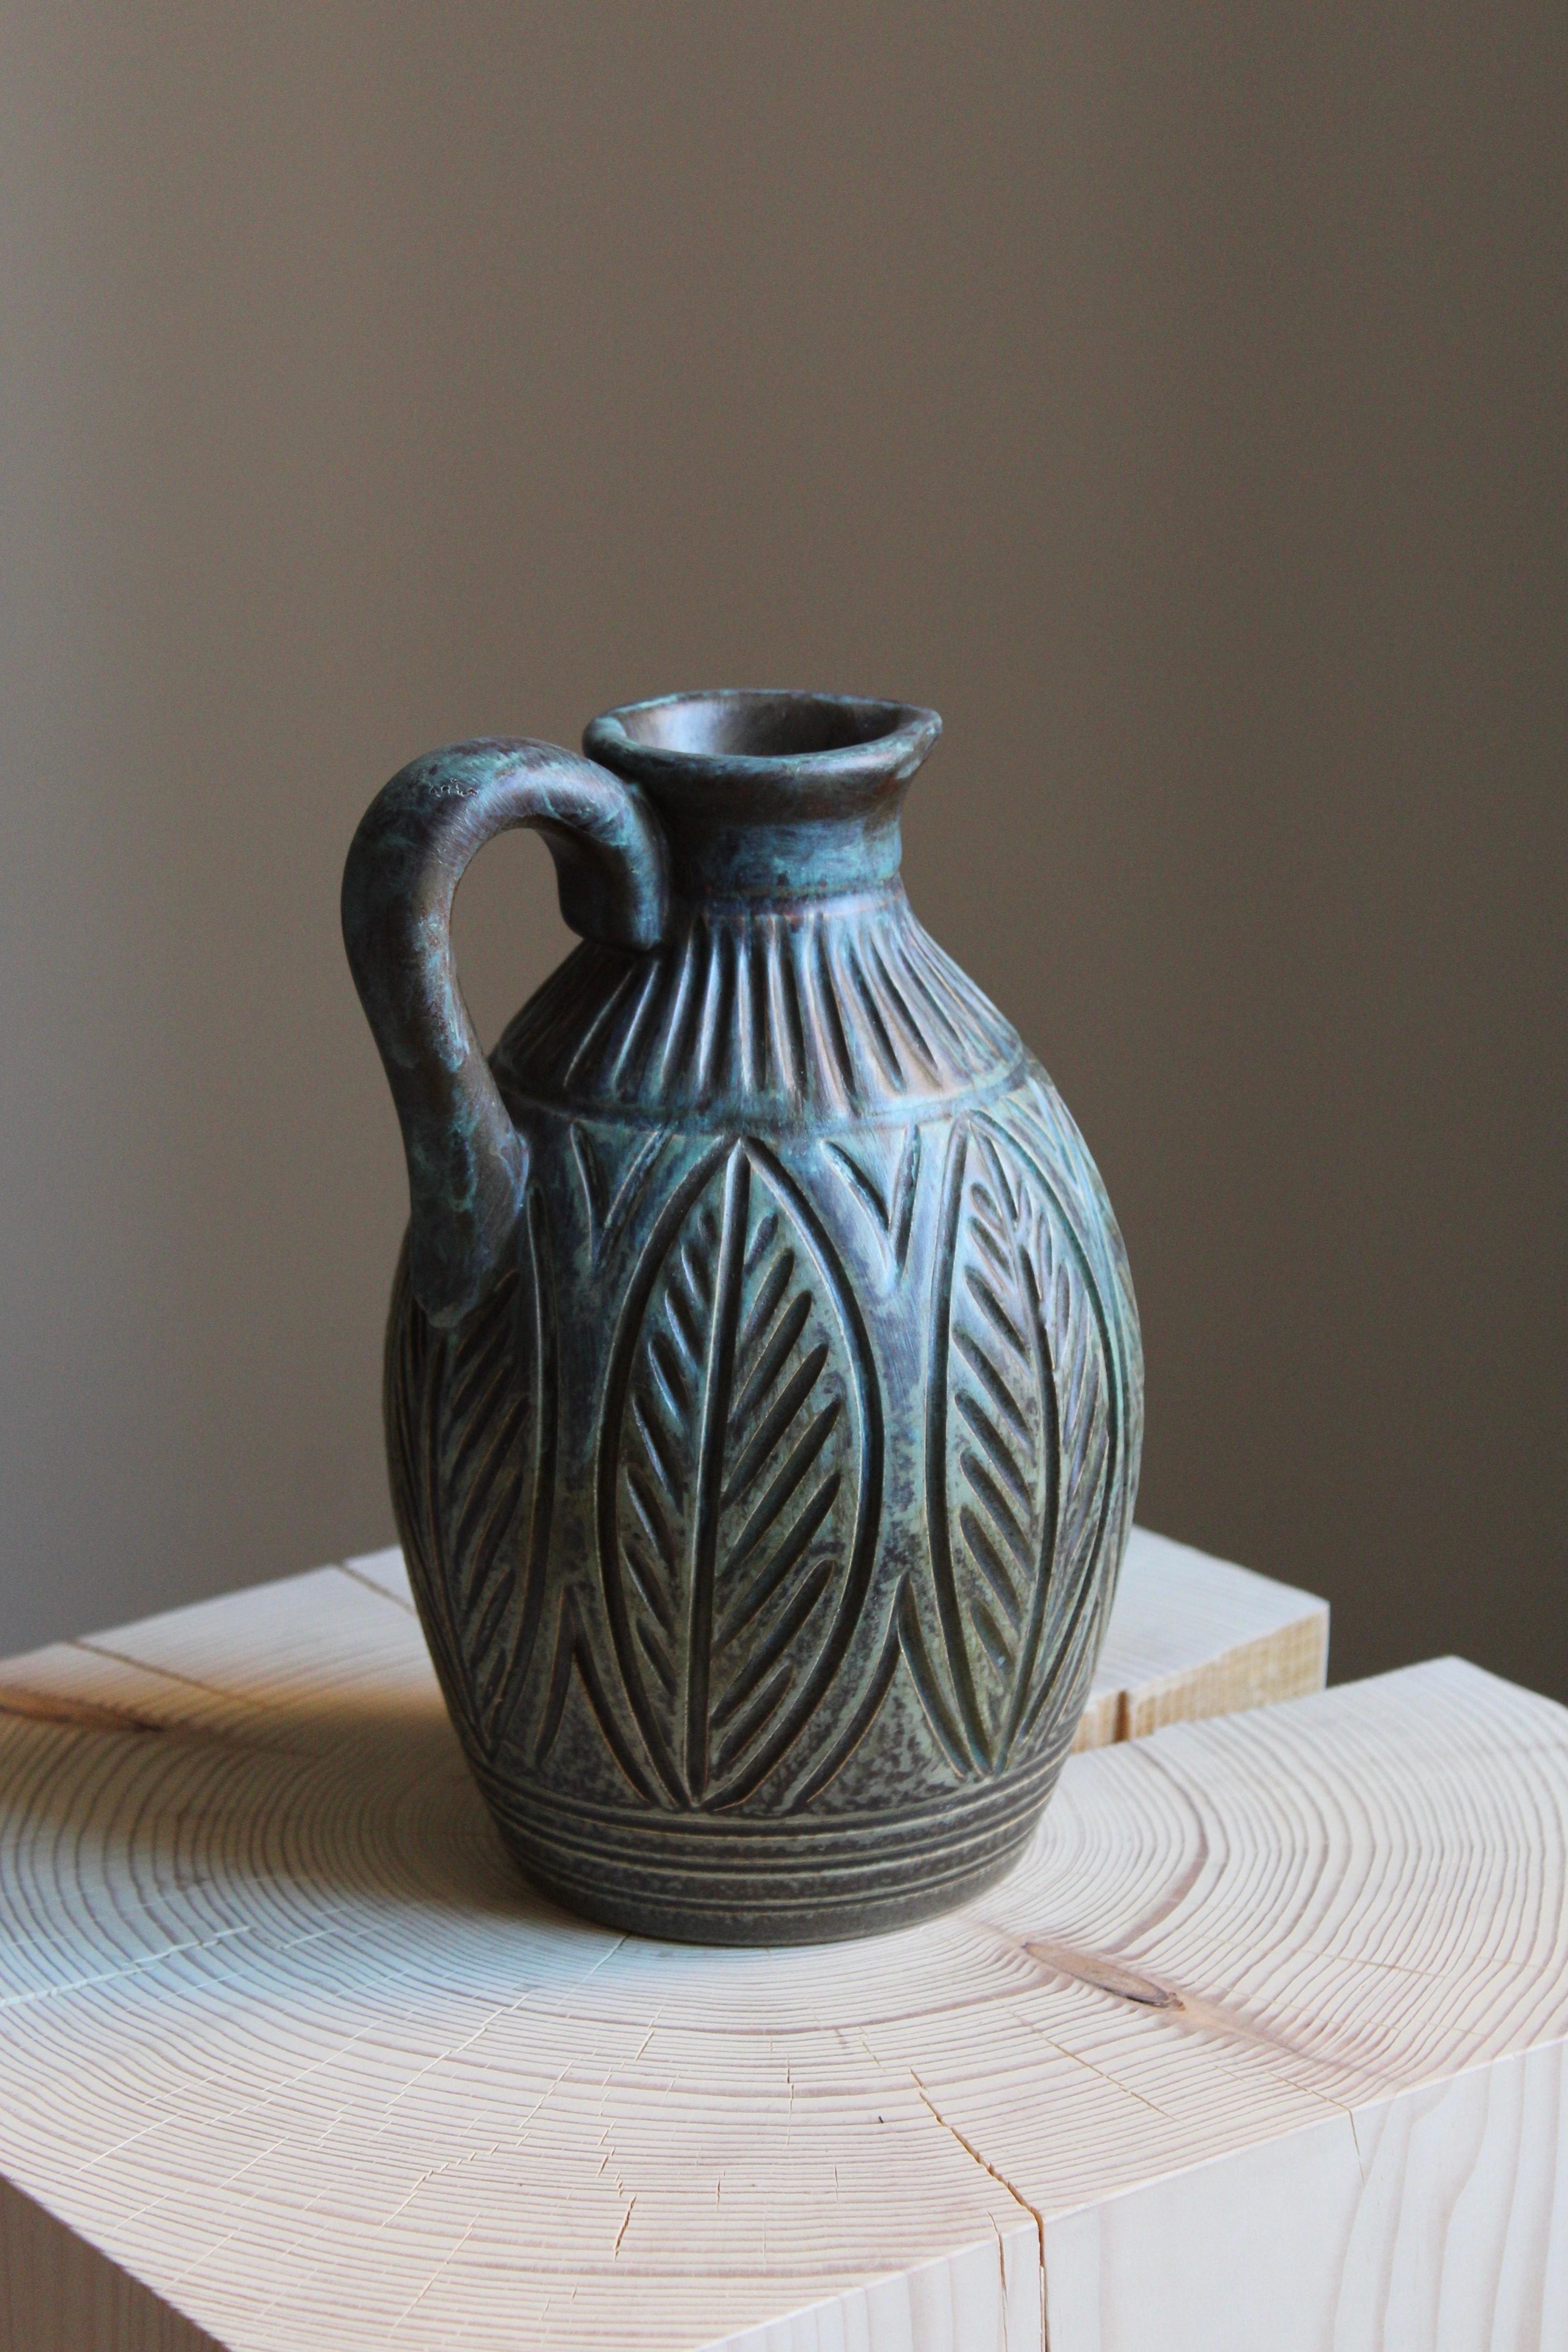 A finely ornamented and glazed stoneware pitcher or vase. In grey / blue with tones of green. Produced by Joghus Keramik, Bornholm, Denmark, 1956.

Other designers of the period include Axel Salto, Arne Bang, Wilhelm Kåge, and Stig Lindberg.